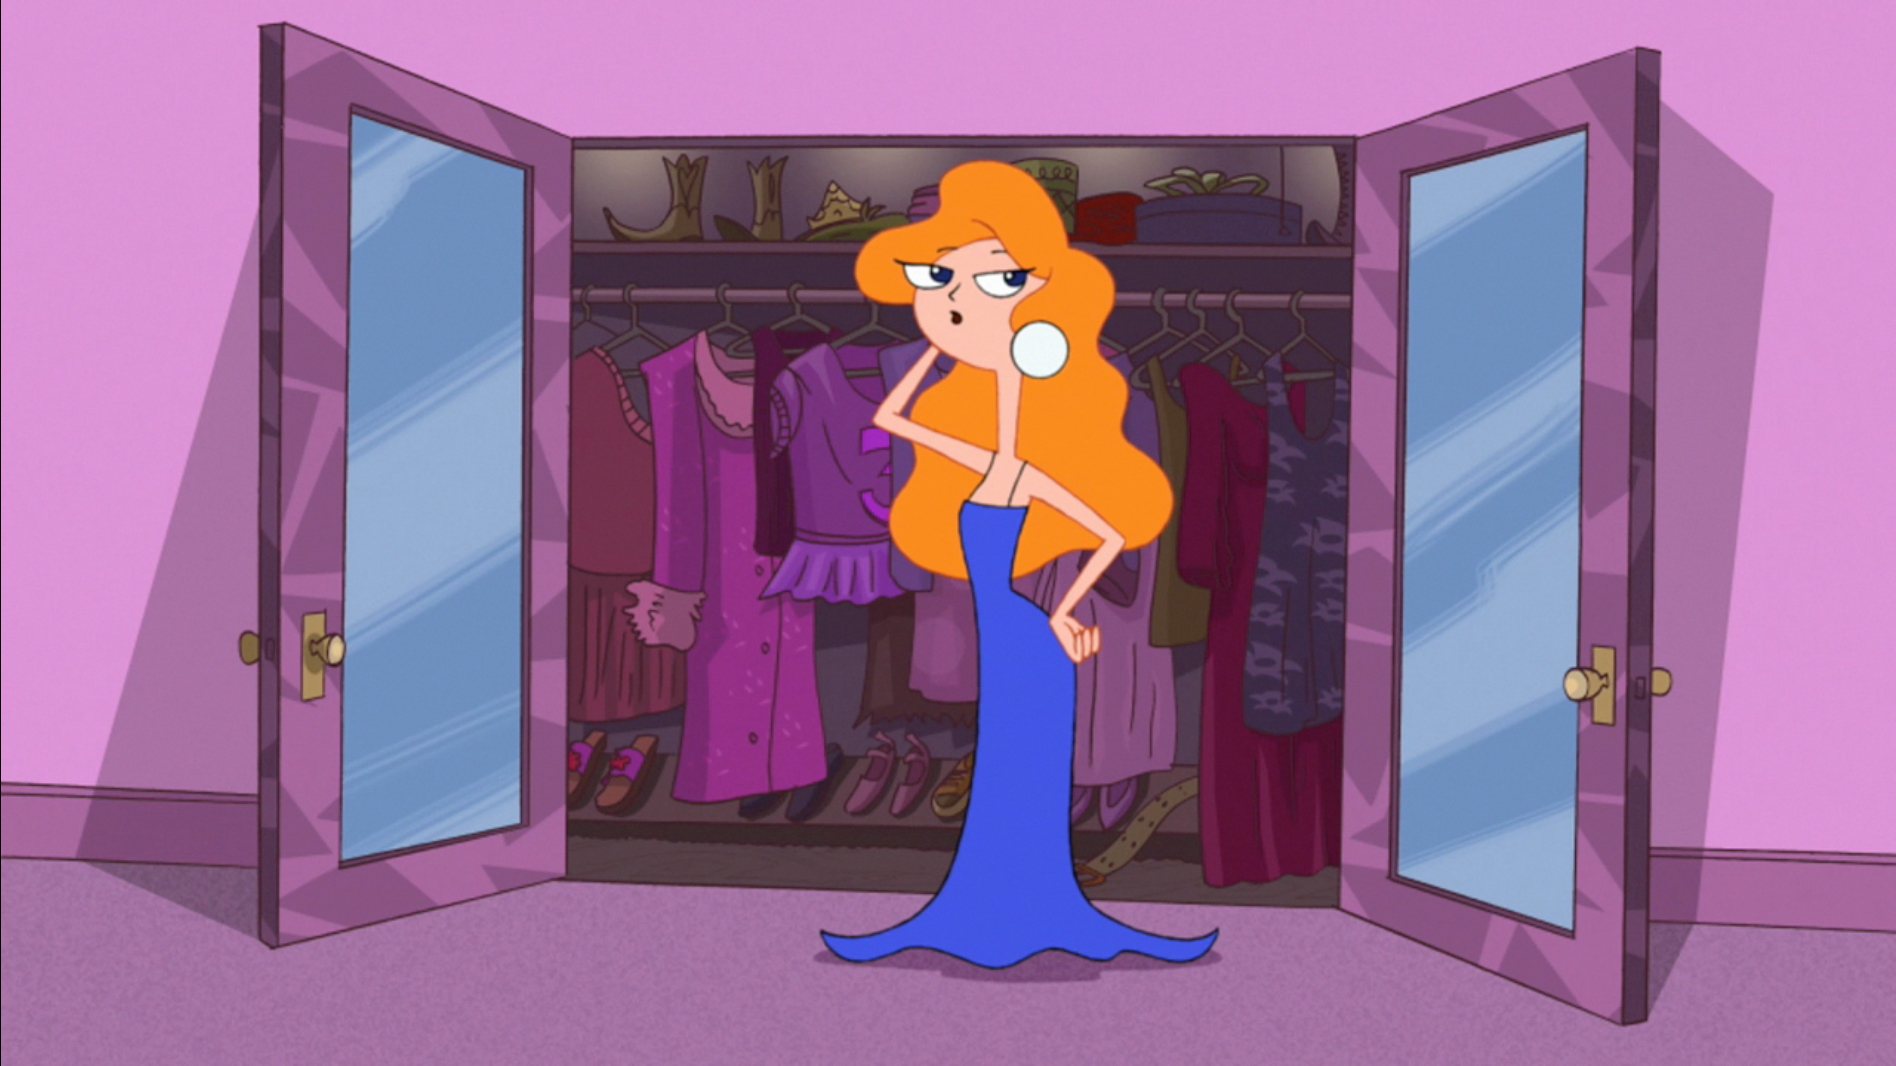 Image Candace Tries On A Blue Gown Phineas And Ferb Wiki Fandom Powered By Wikia 4399